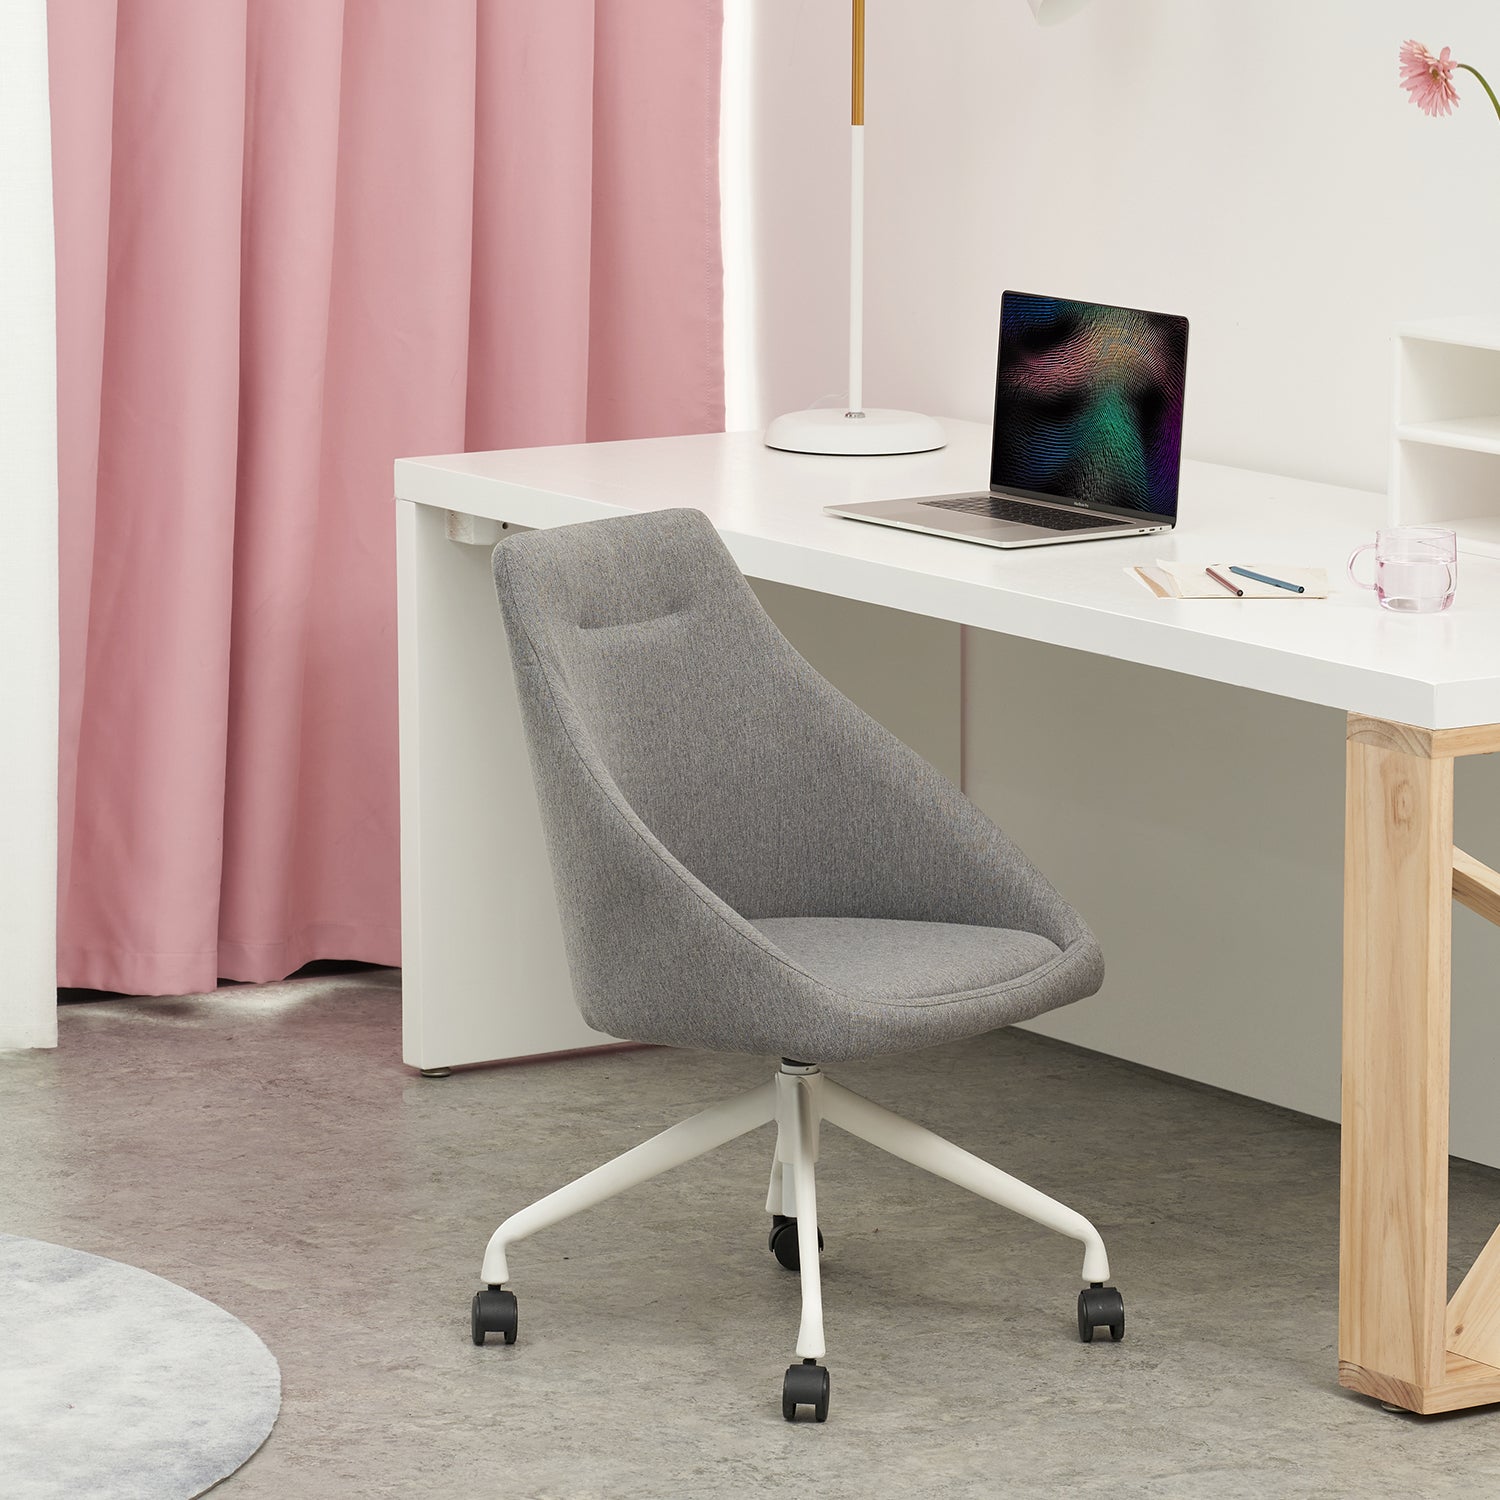 Modern Office & Desk Chairs: Swivel Home Office Chairs